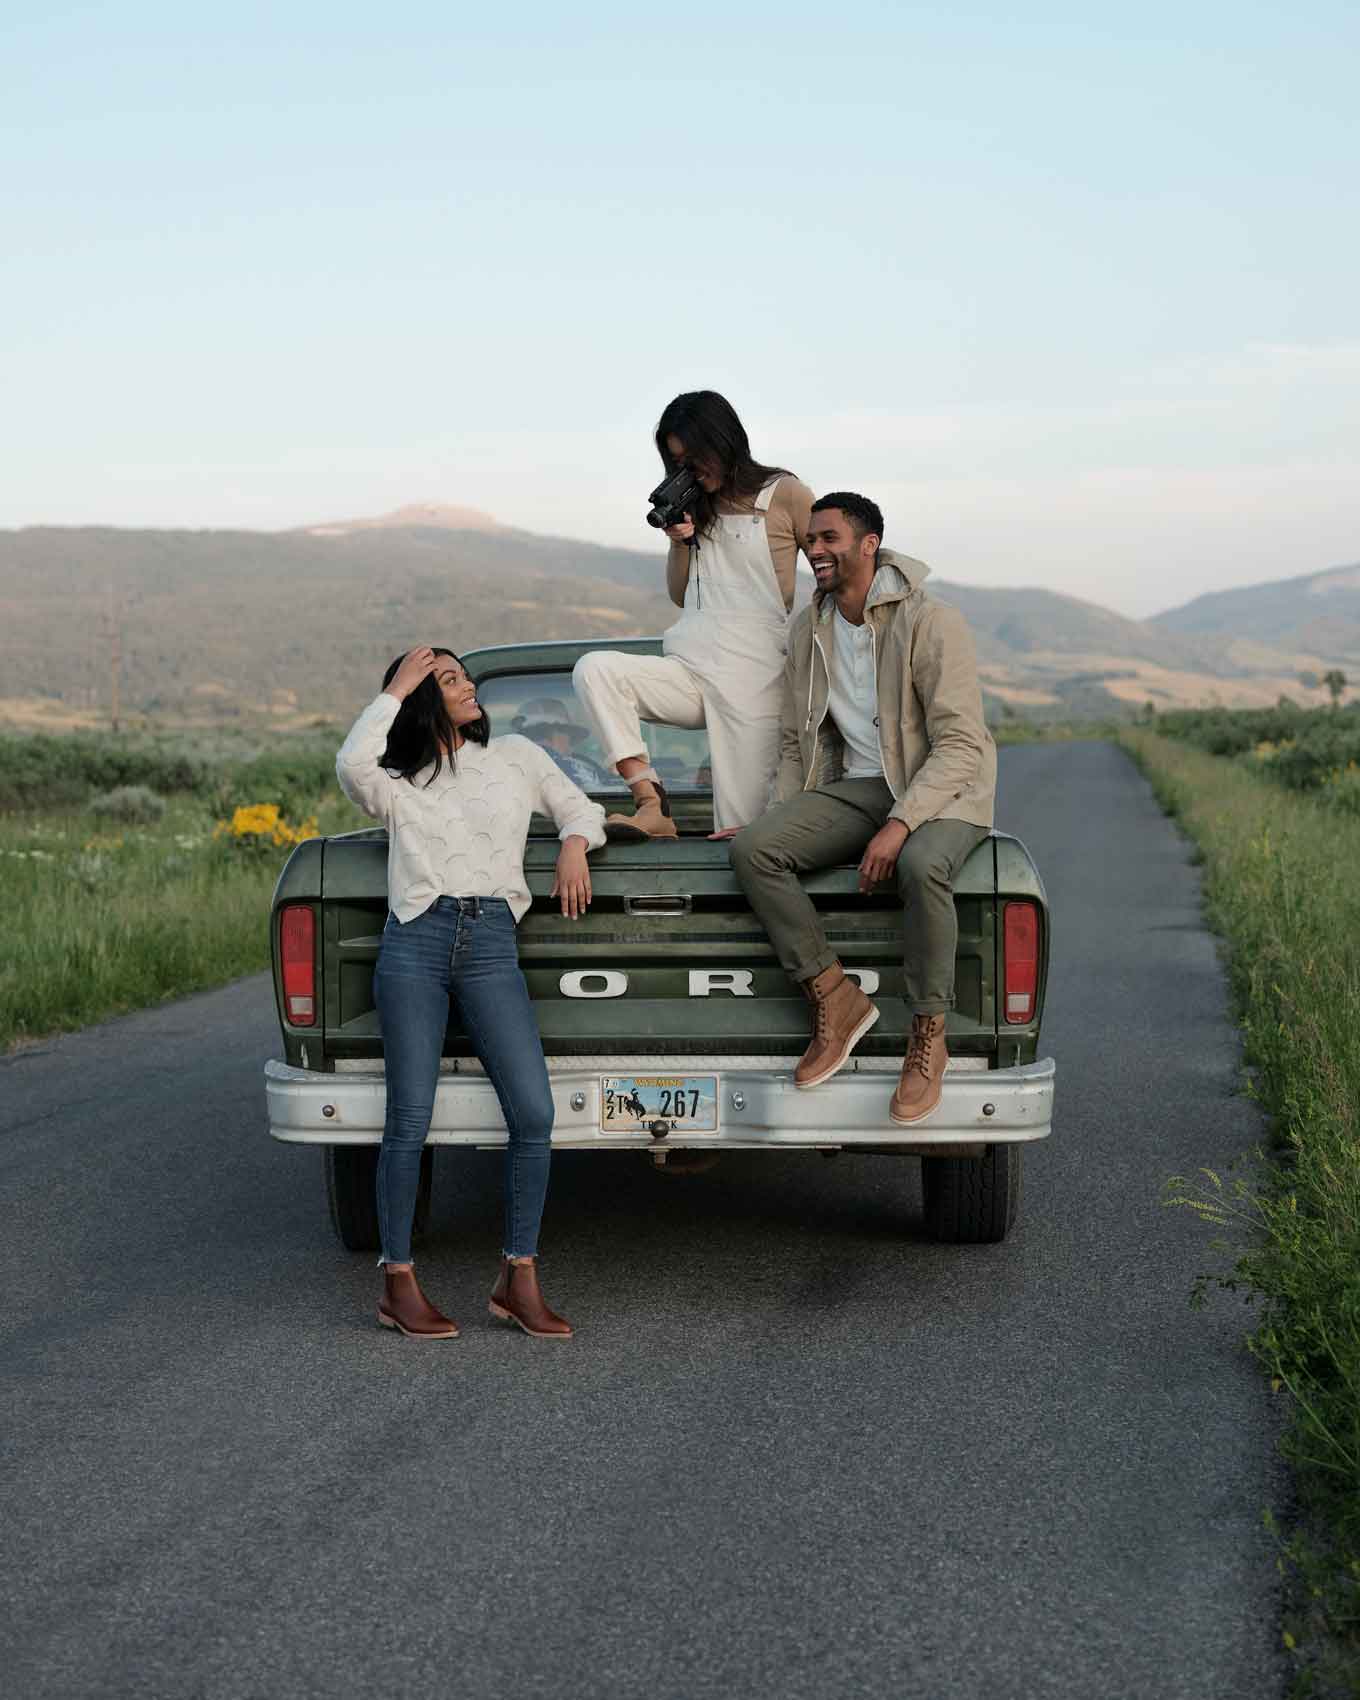 Two women and a man pose and take photos of each other on a back of a vintage truck on a country road, wearing ethically made clothes and shoes from Nisoloo